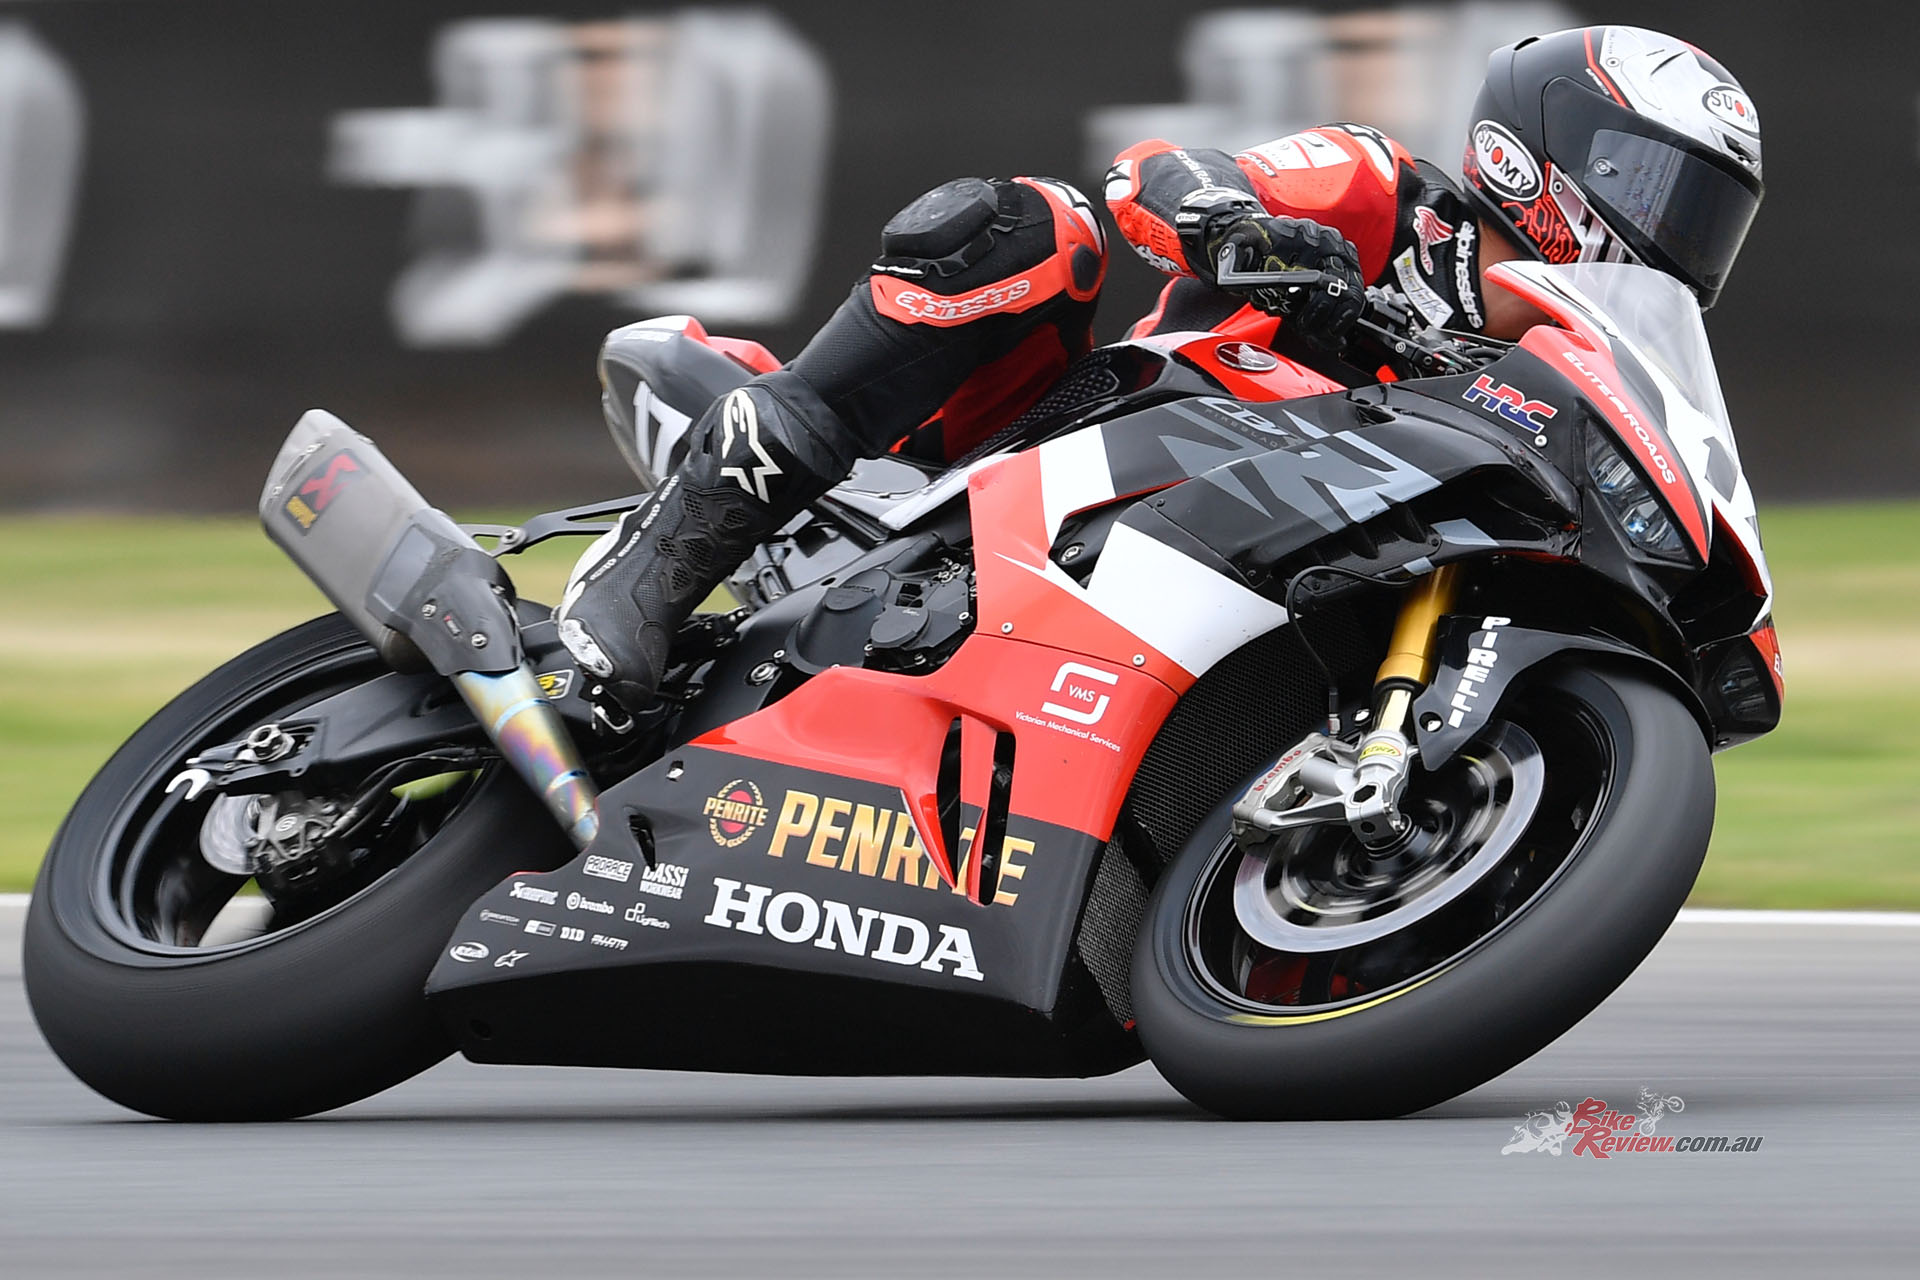 Troy Herfoss was determined to make his Honda swansong a fairytale after unleashing a towering qualifying performance in round seven of the 2023 mi-bike Motorcycle Insurance Australian Superbike Championship, presented by Motul.